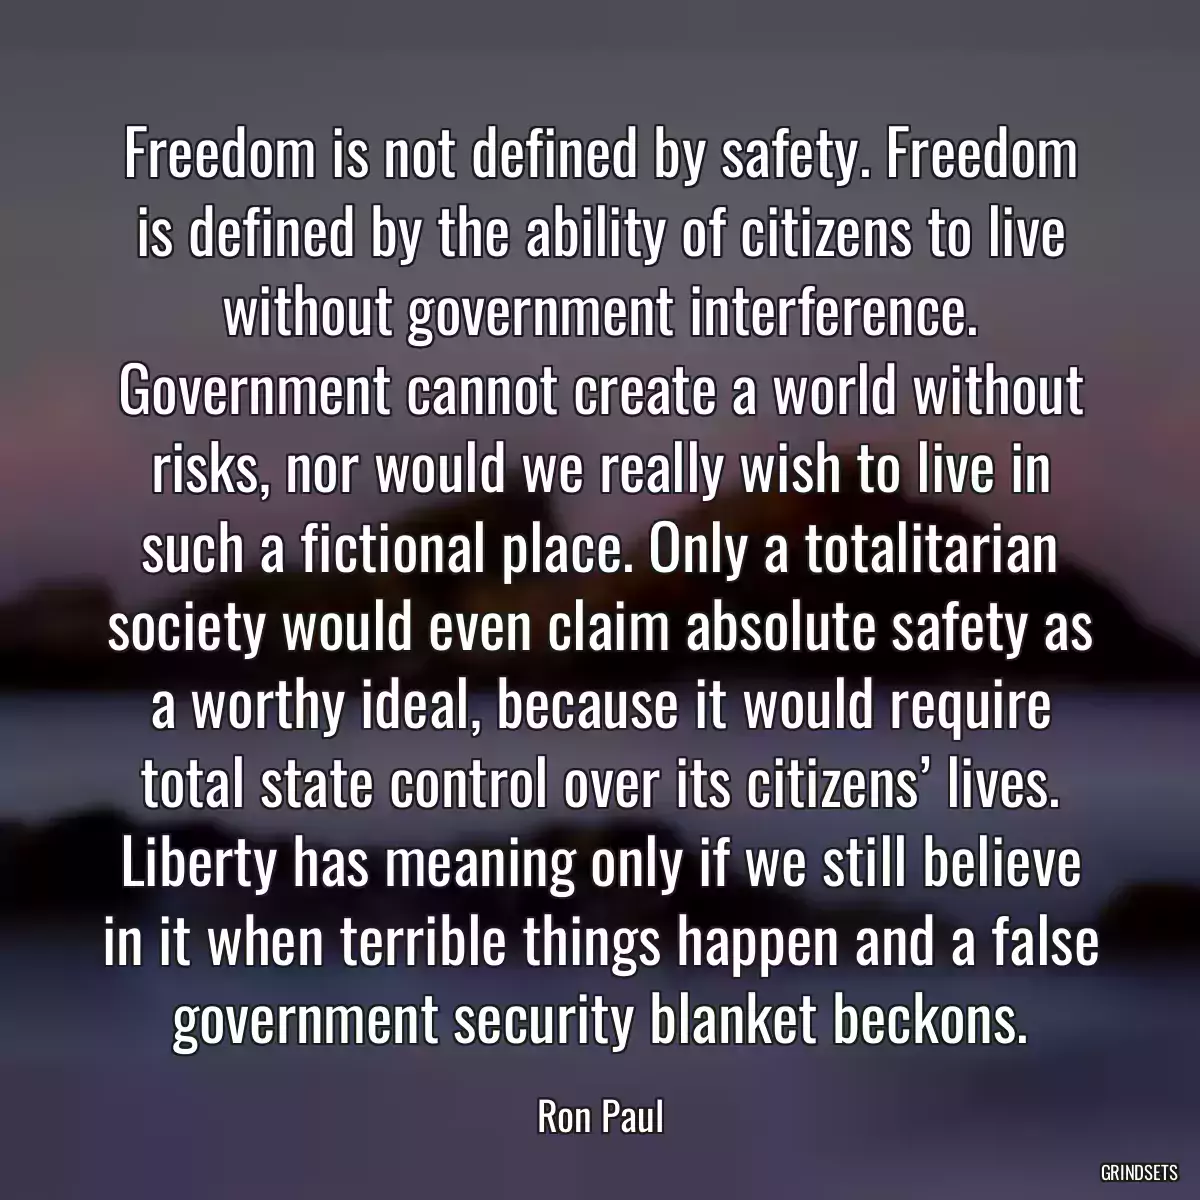 Freedom is not defined by safety. Freedom is defined by the ability of citizens to live without government interference. Government cannot create a world without risks, nor would we really wish to live in such a fictional place. Only a totalitarian society would even claim absolute safety as a worthy ideal, because it would require total state control over its citizens’ lives. Liberty has meaning only if we still believe in it when terrible things happen and a false government security blanket beckons.